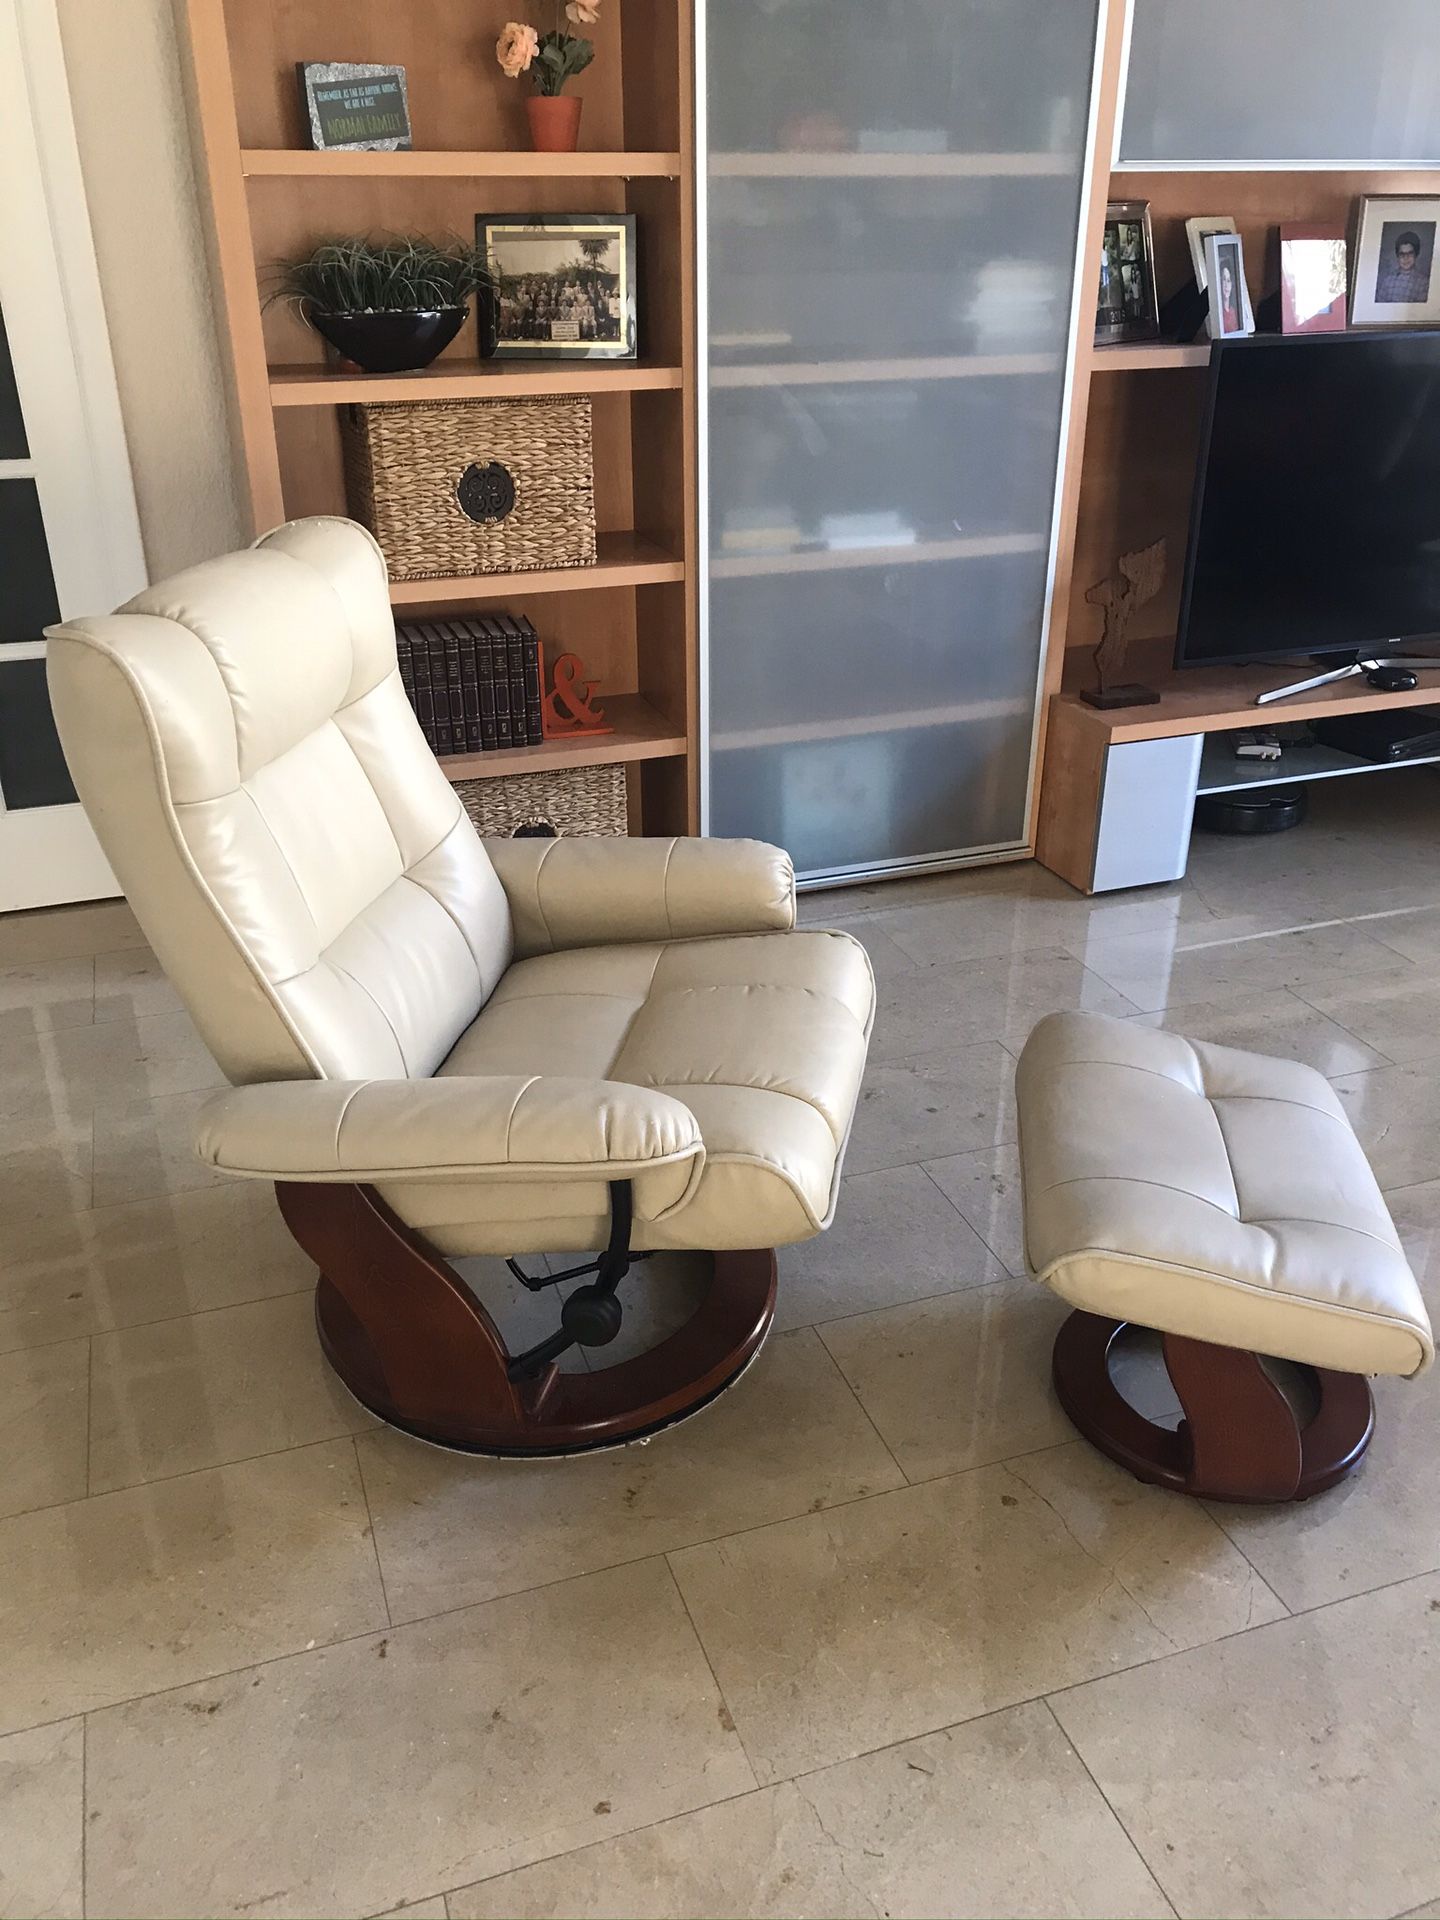 Ottoman and chair